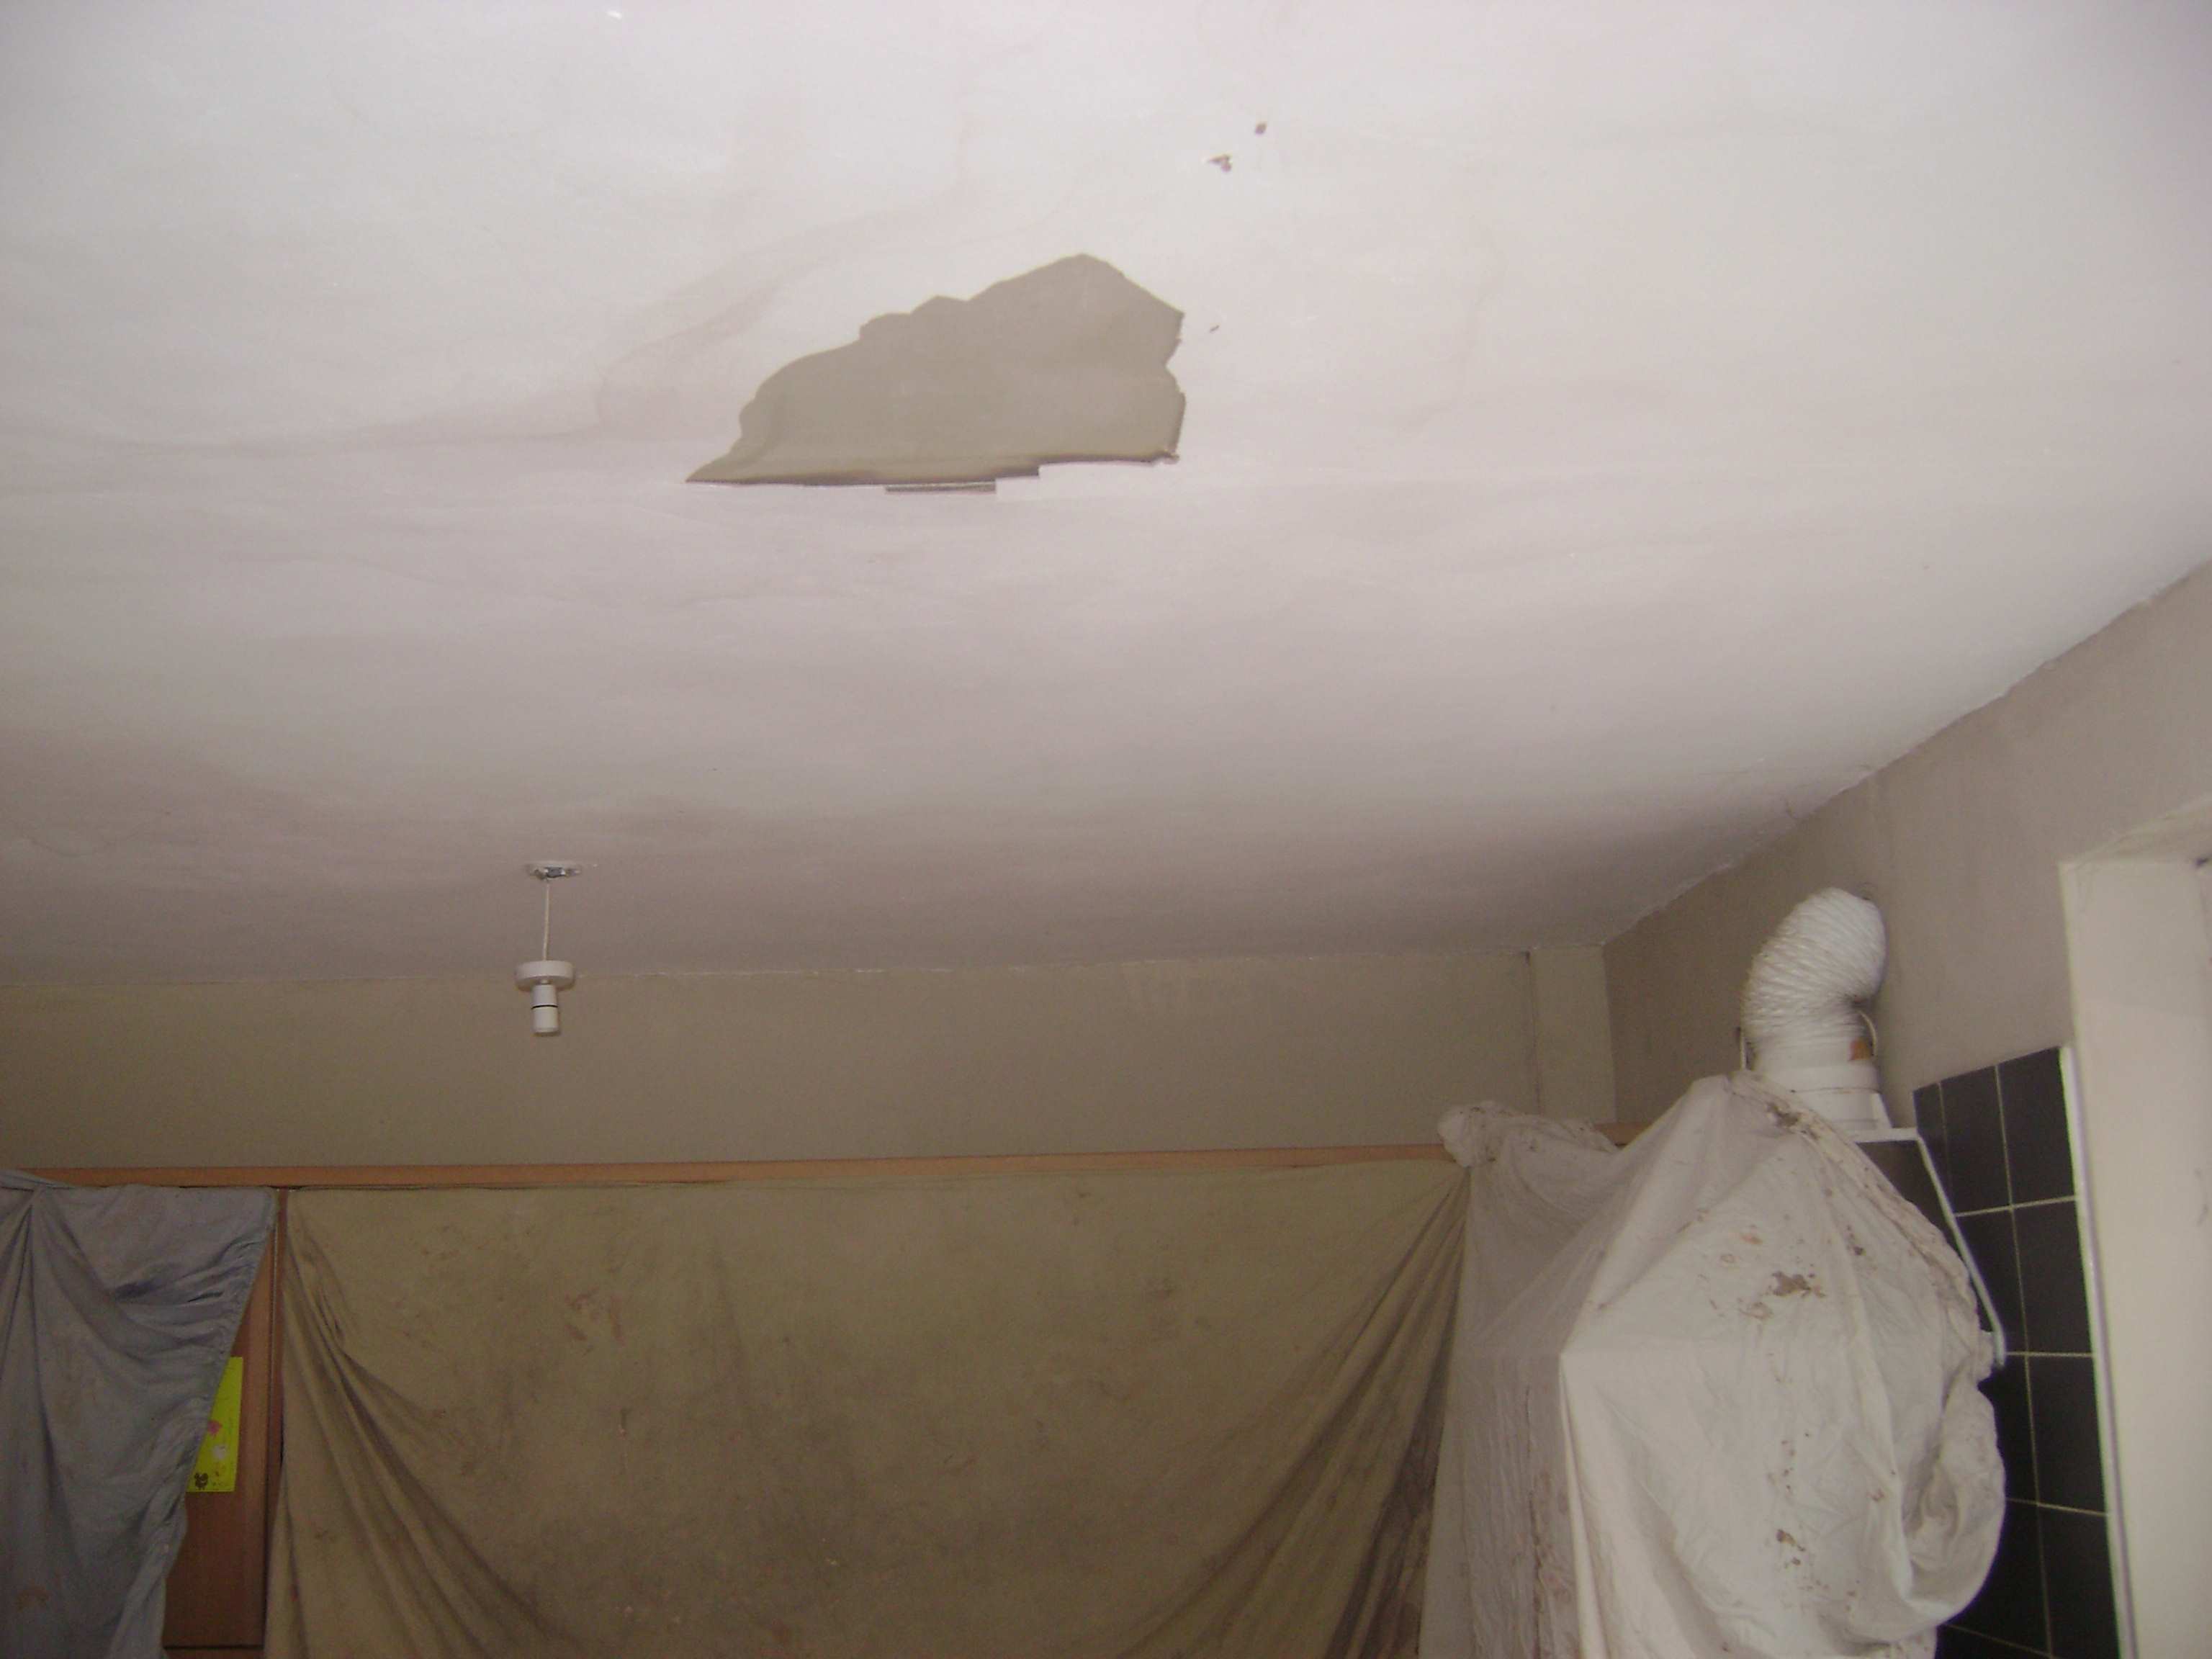 This ceiling had been water damaged from a leaking pipe above and allowed to dry, causing the plaster to blow